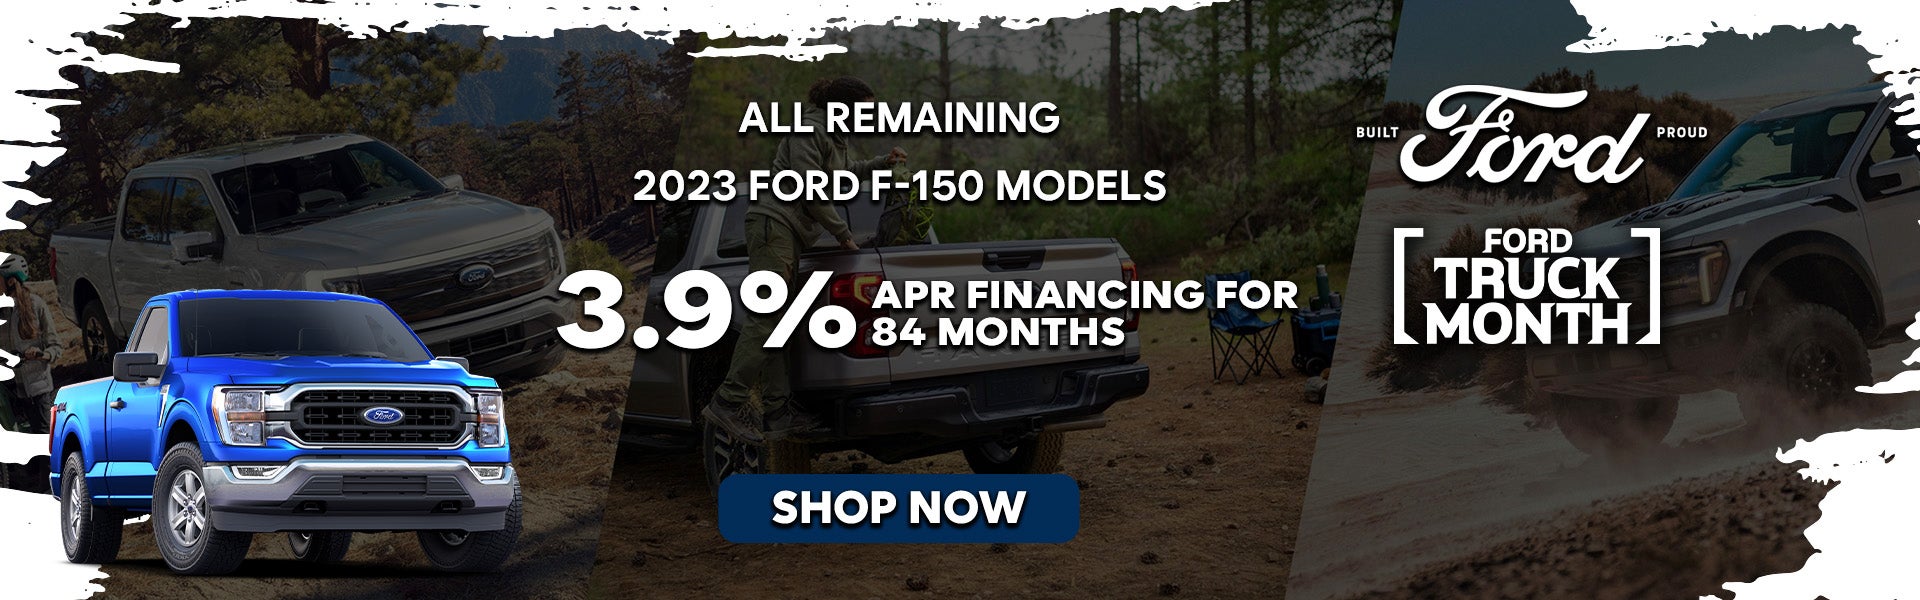 Save on 2023 New Ford F-150